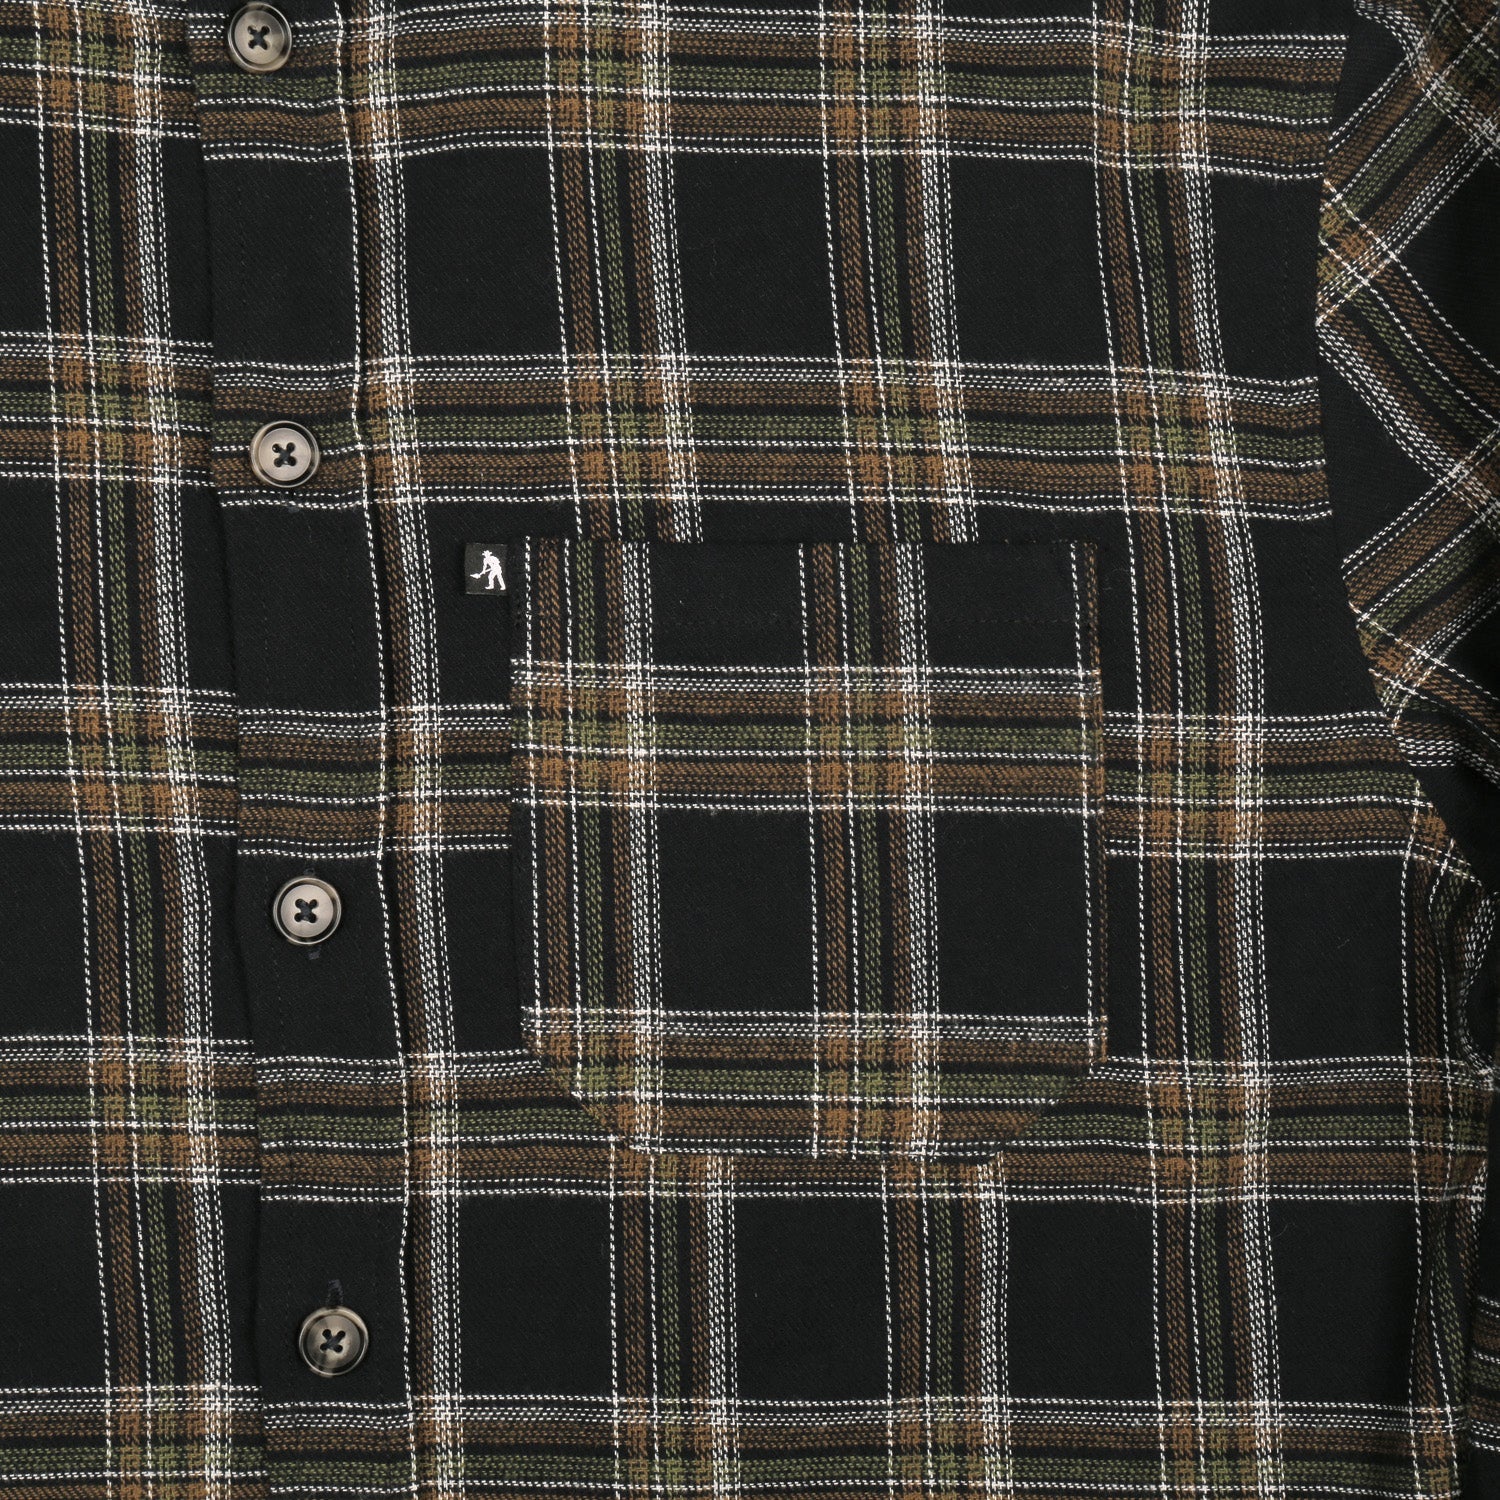 PASS~PORT "WORKERS" FLANNEL NAVY